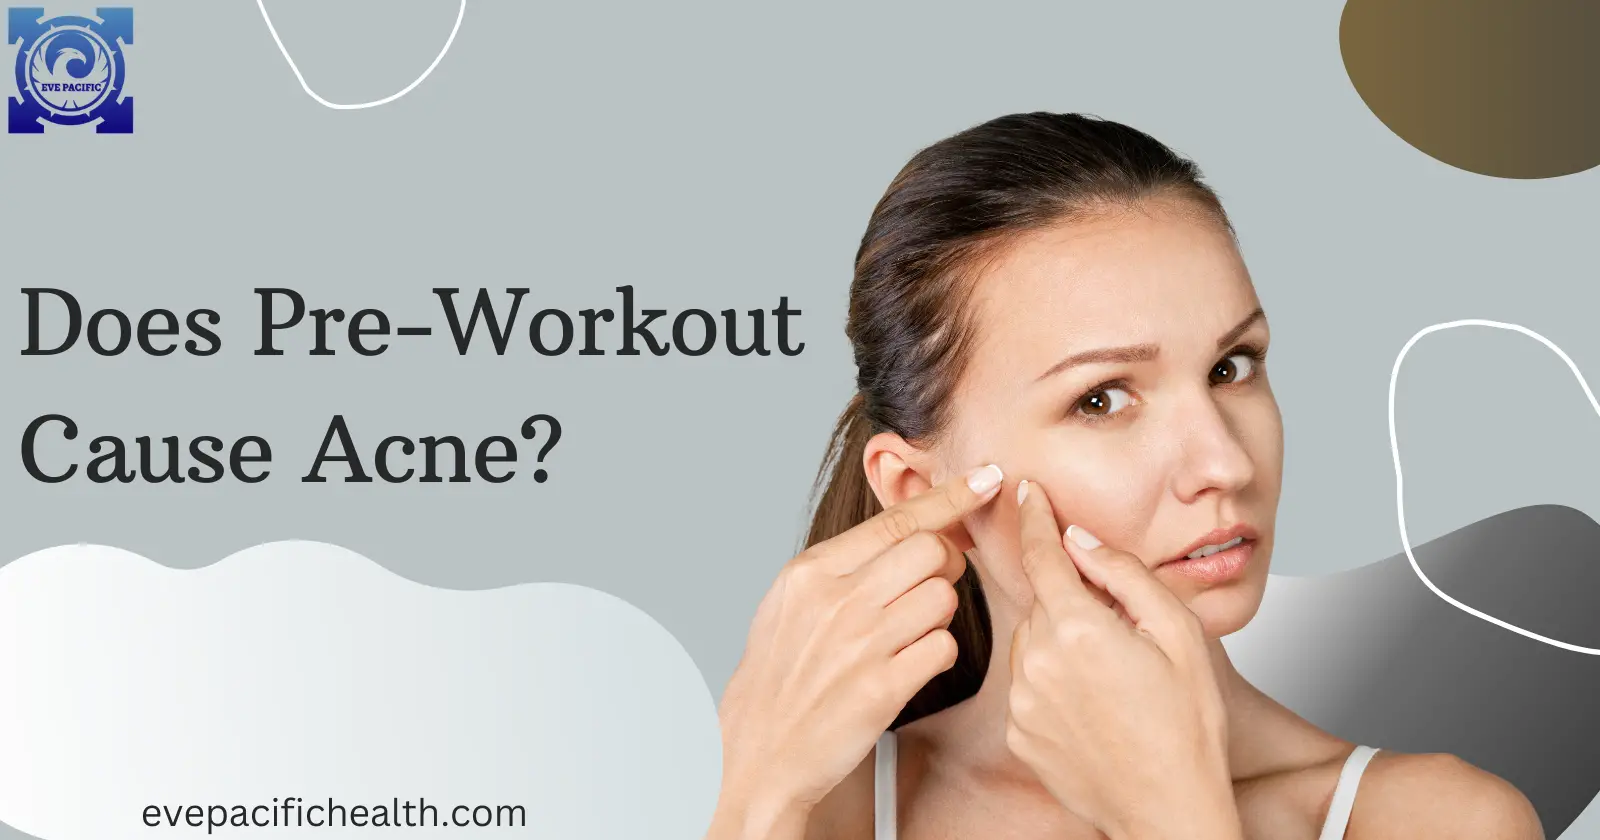 Does Pre-Workout Cause Acne